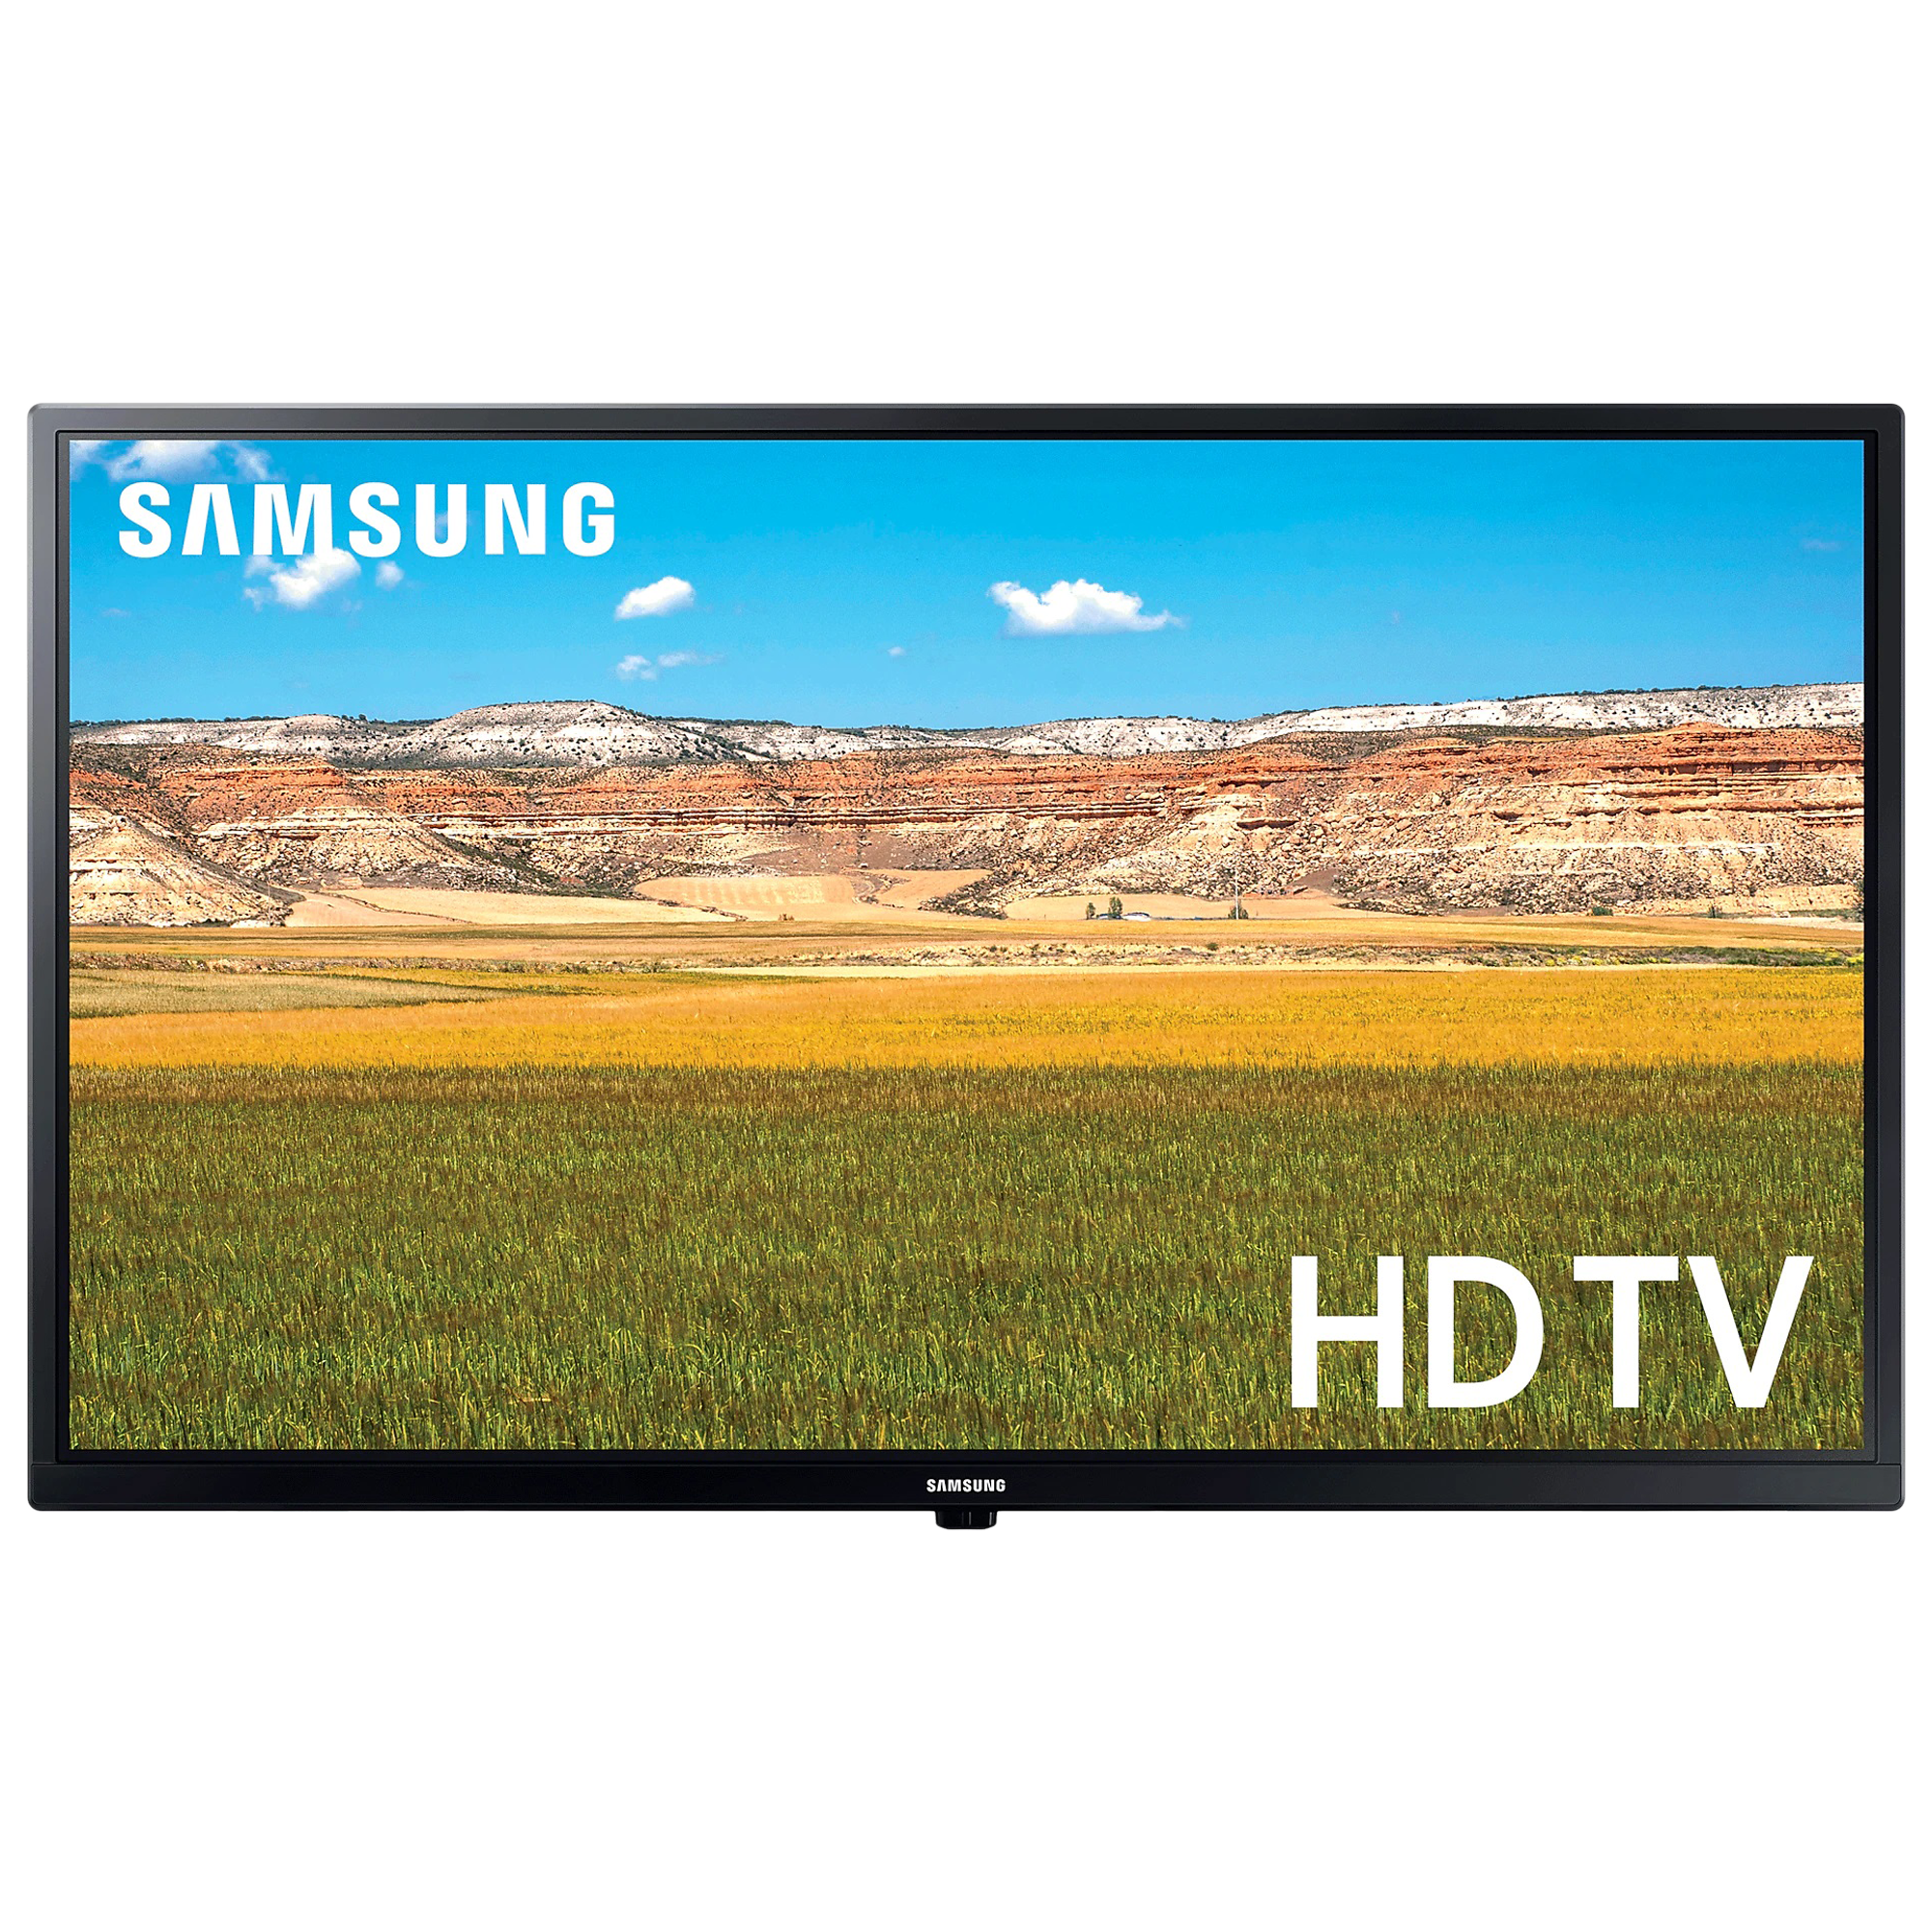 Croma Retail - Samsung T4340 80cm (32 Inch) HD Ready LED Smart TV (Dolby Digital Plus with Hyper Real Picture Processor, UA32T4340AKXXL, Glossy Black)